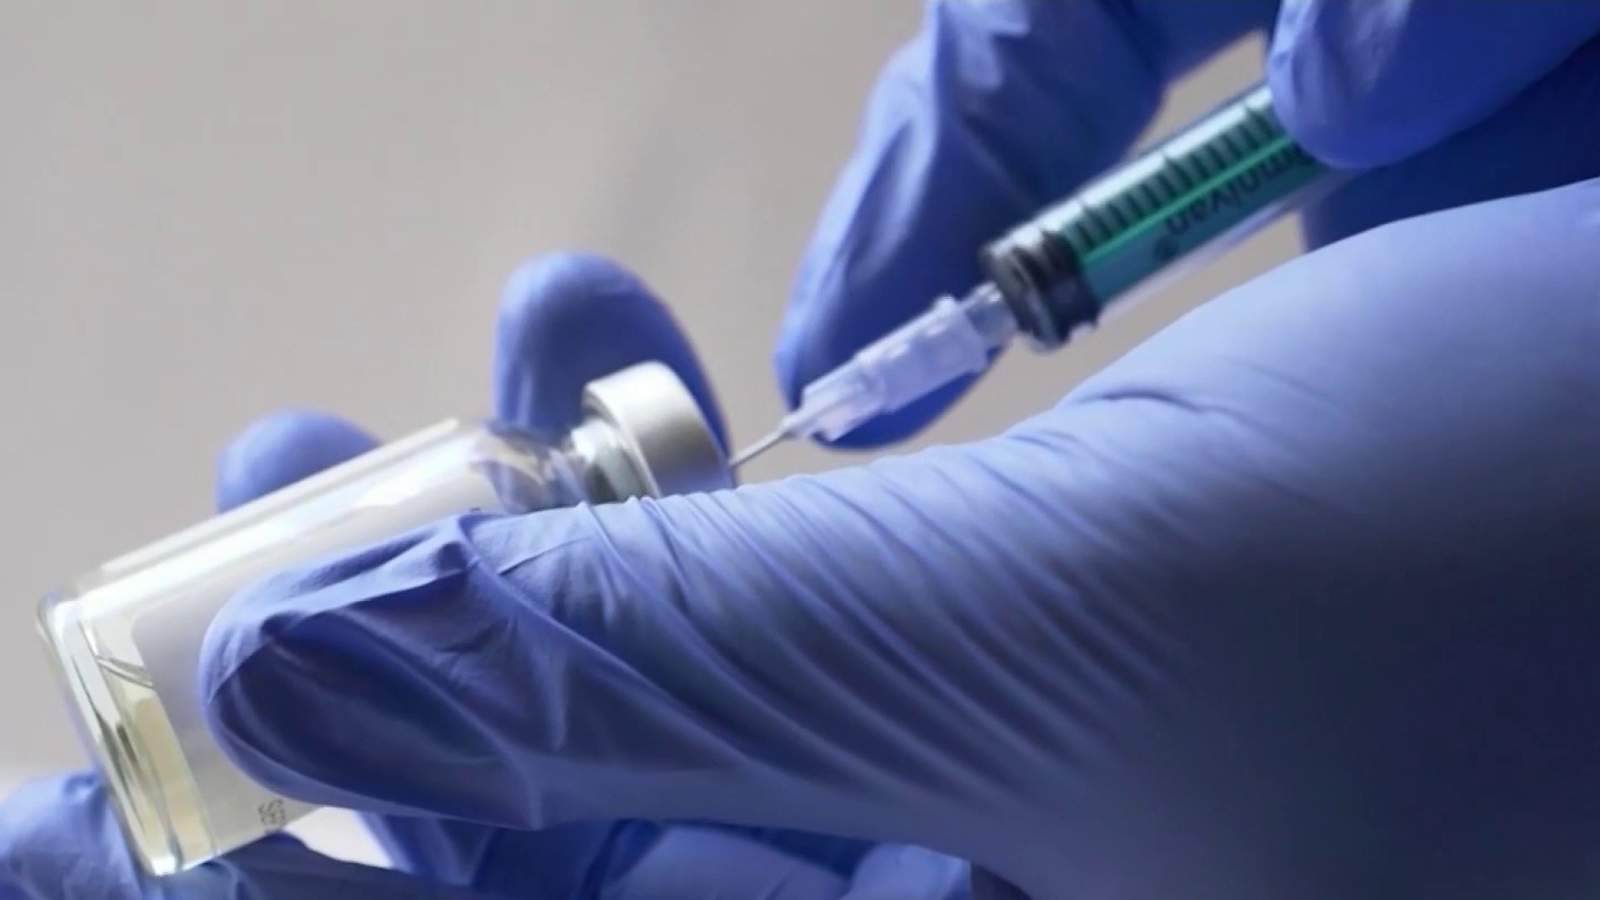 1,000 COVID vaccine doses damaged in Florida county